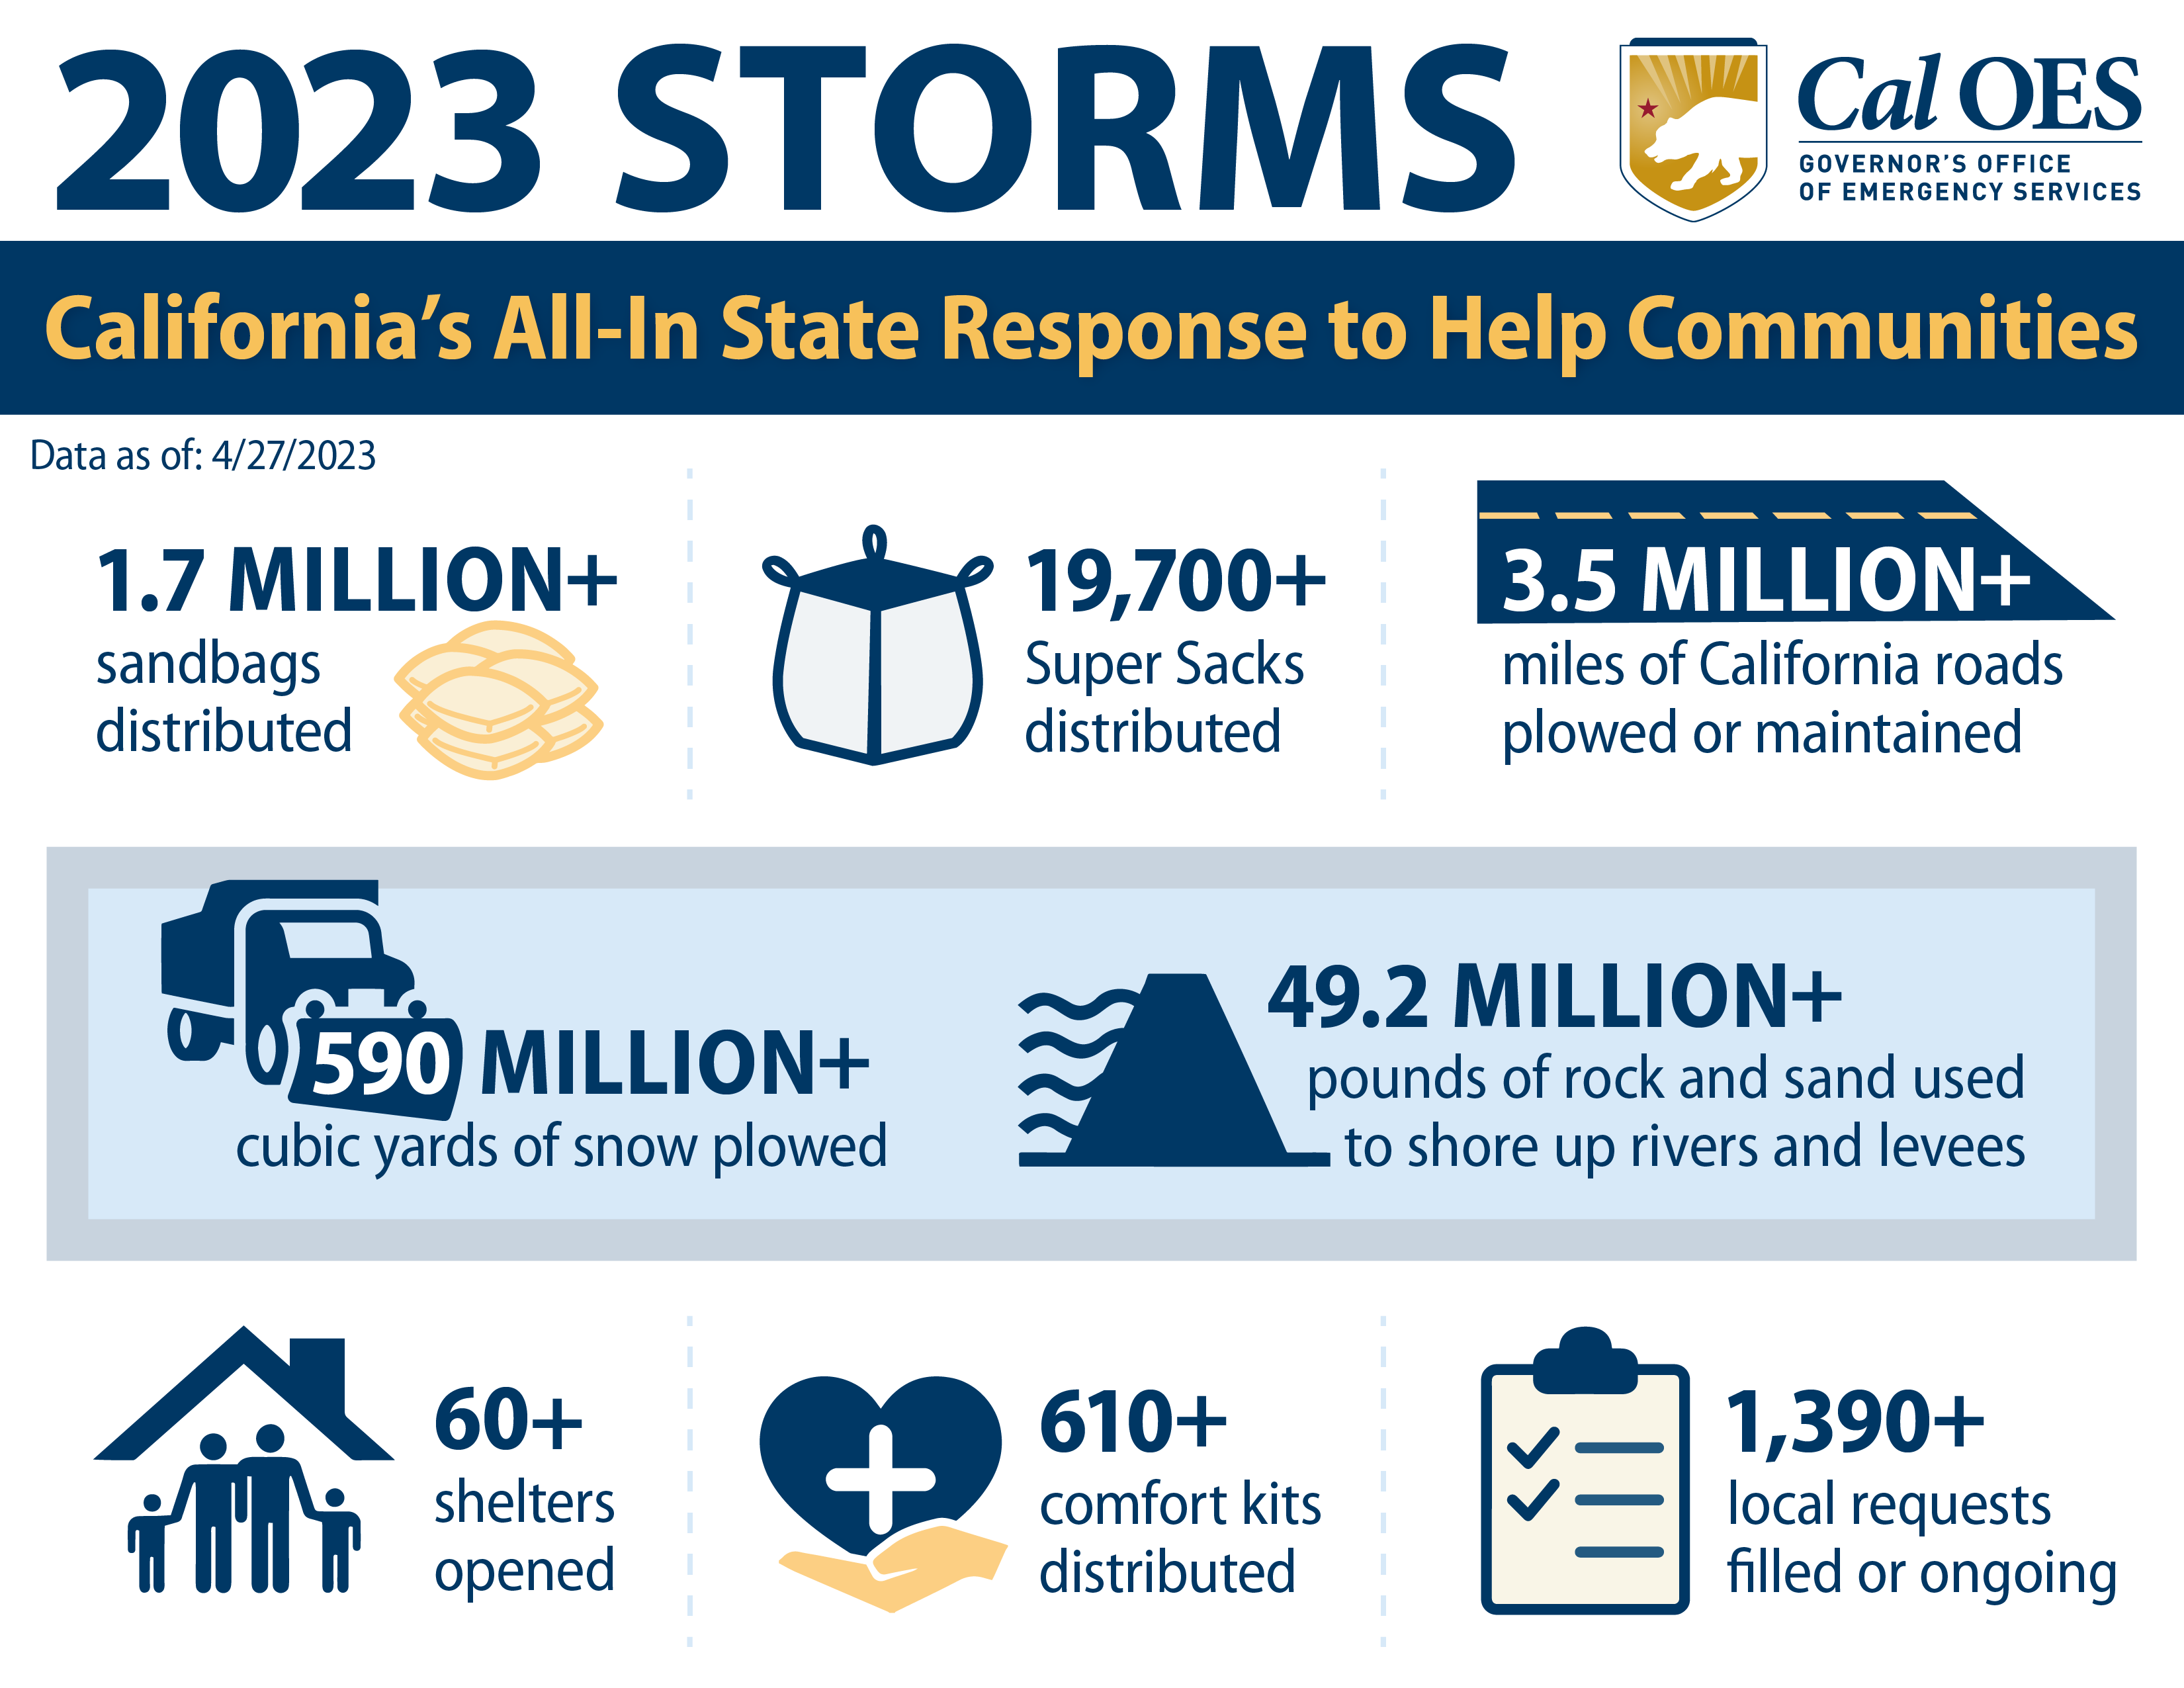 2023 Storms California's All-In State Response to Help Communities Data as of: 4/27/2023 Sandbags (each): Total: 1,710,400 Super Sacks (each): Total: 19,700 49.25 million+ pounds of rock and sand used to shore up rivers and levees 590 million+ cubic yards of snow plowed 3.5 million+ miles of California roads plowed or maintained 1,390+ local requests filled or ongoing 610 comfort kits distributed 60+ shelters coordinated